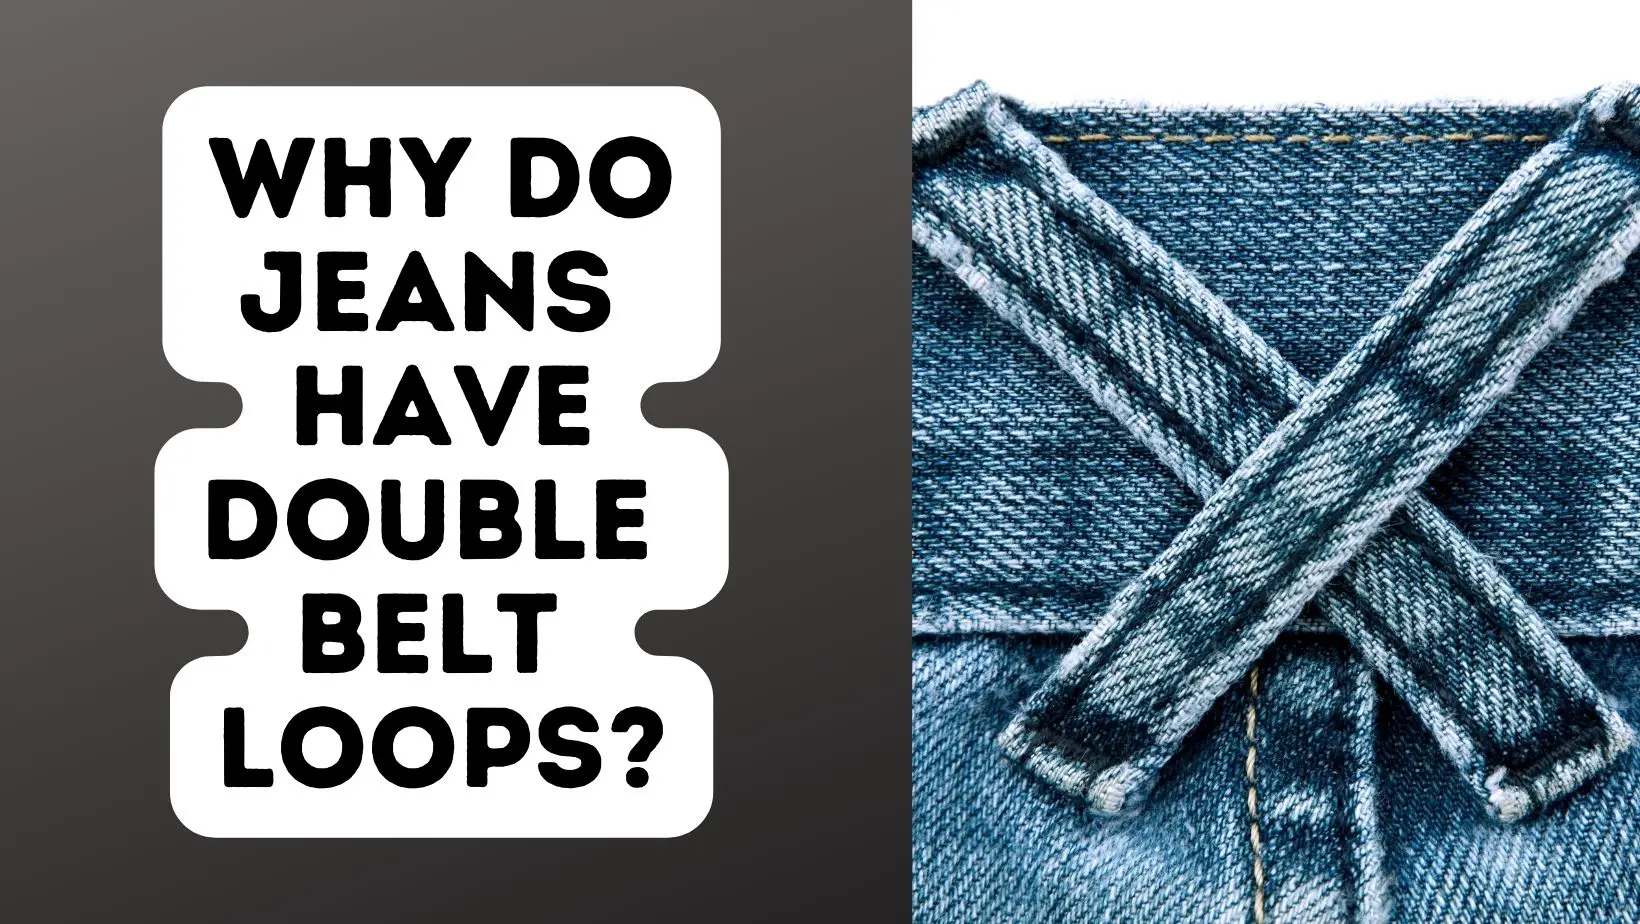 Why Do Jeans Have Double Belt Loops?